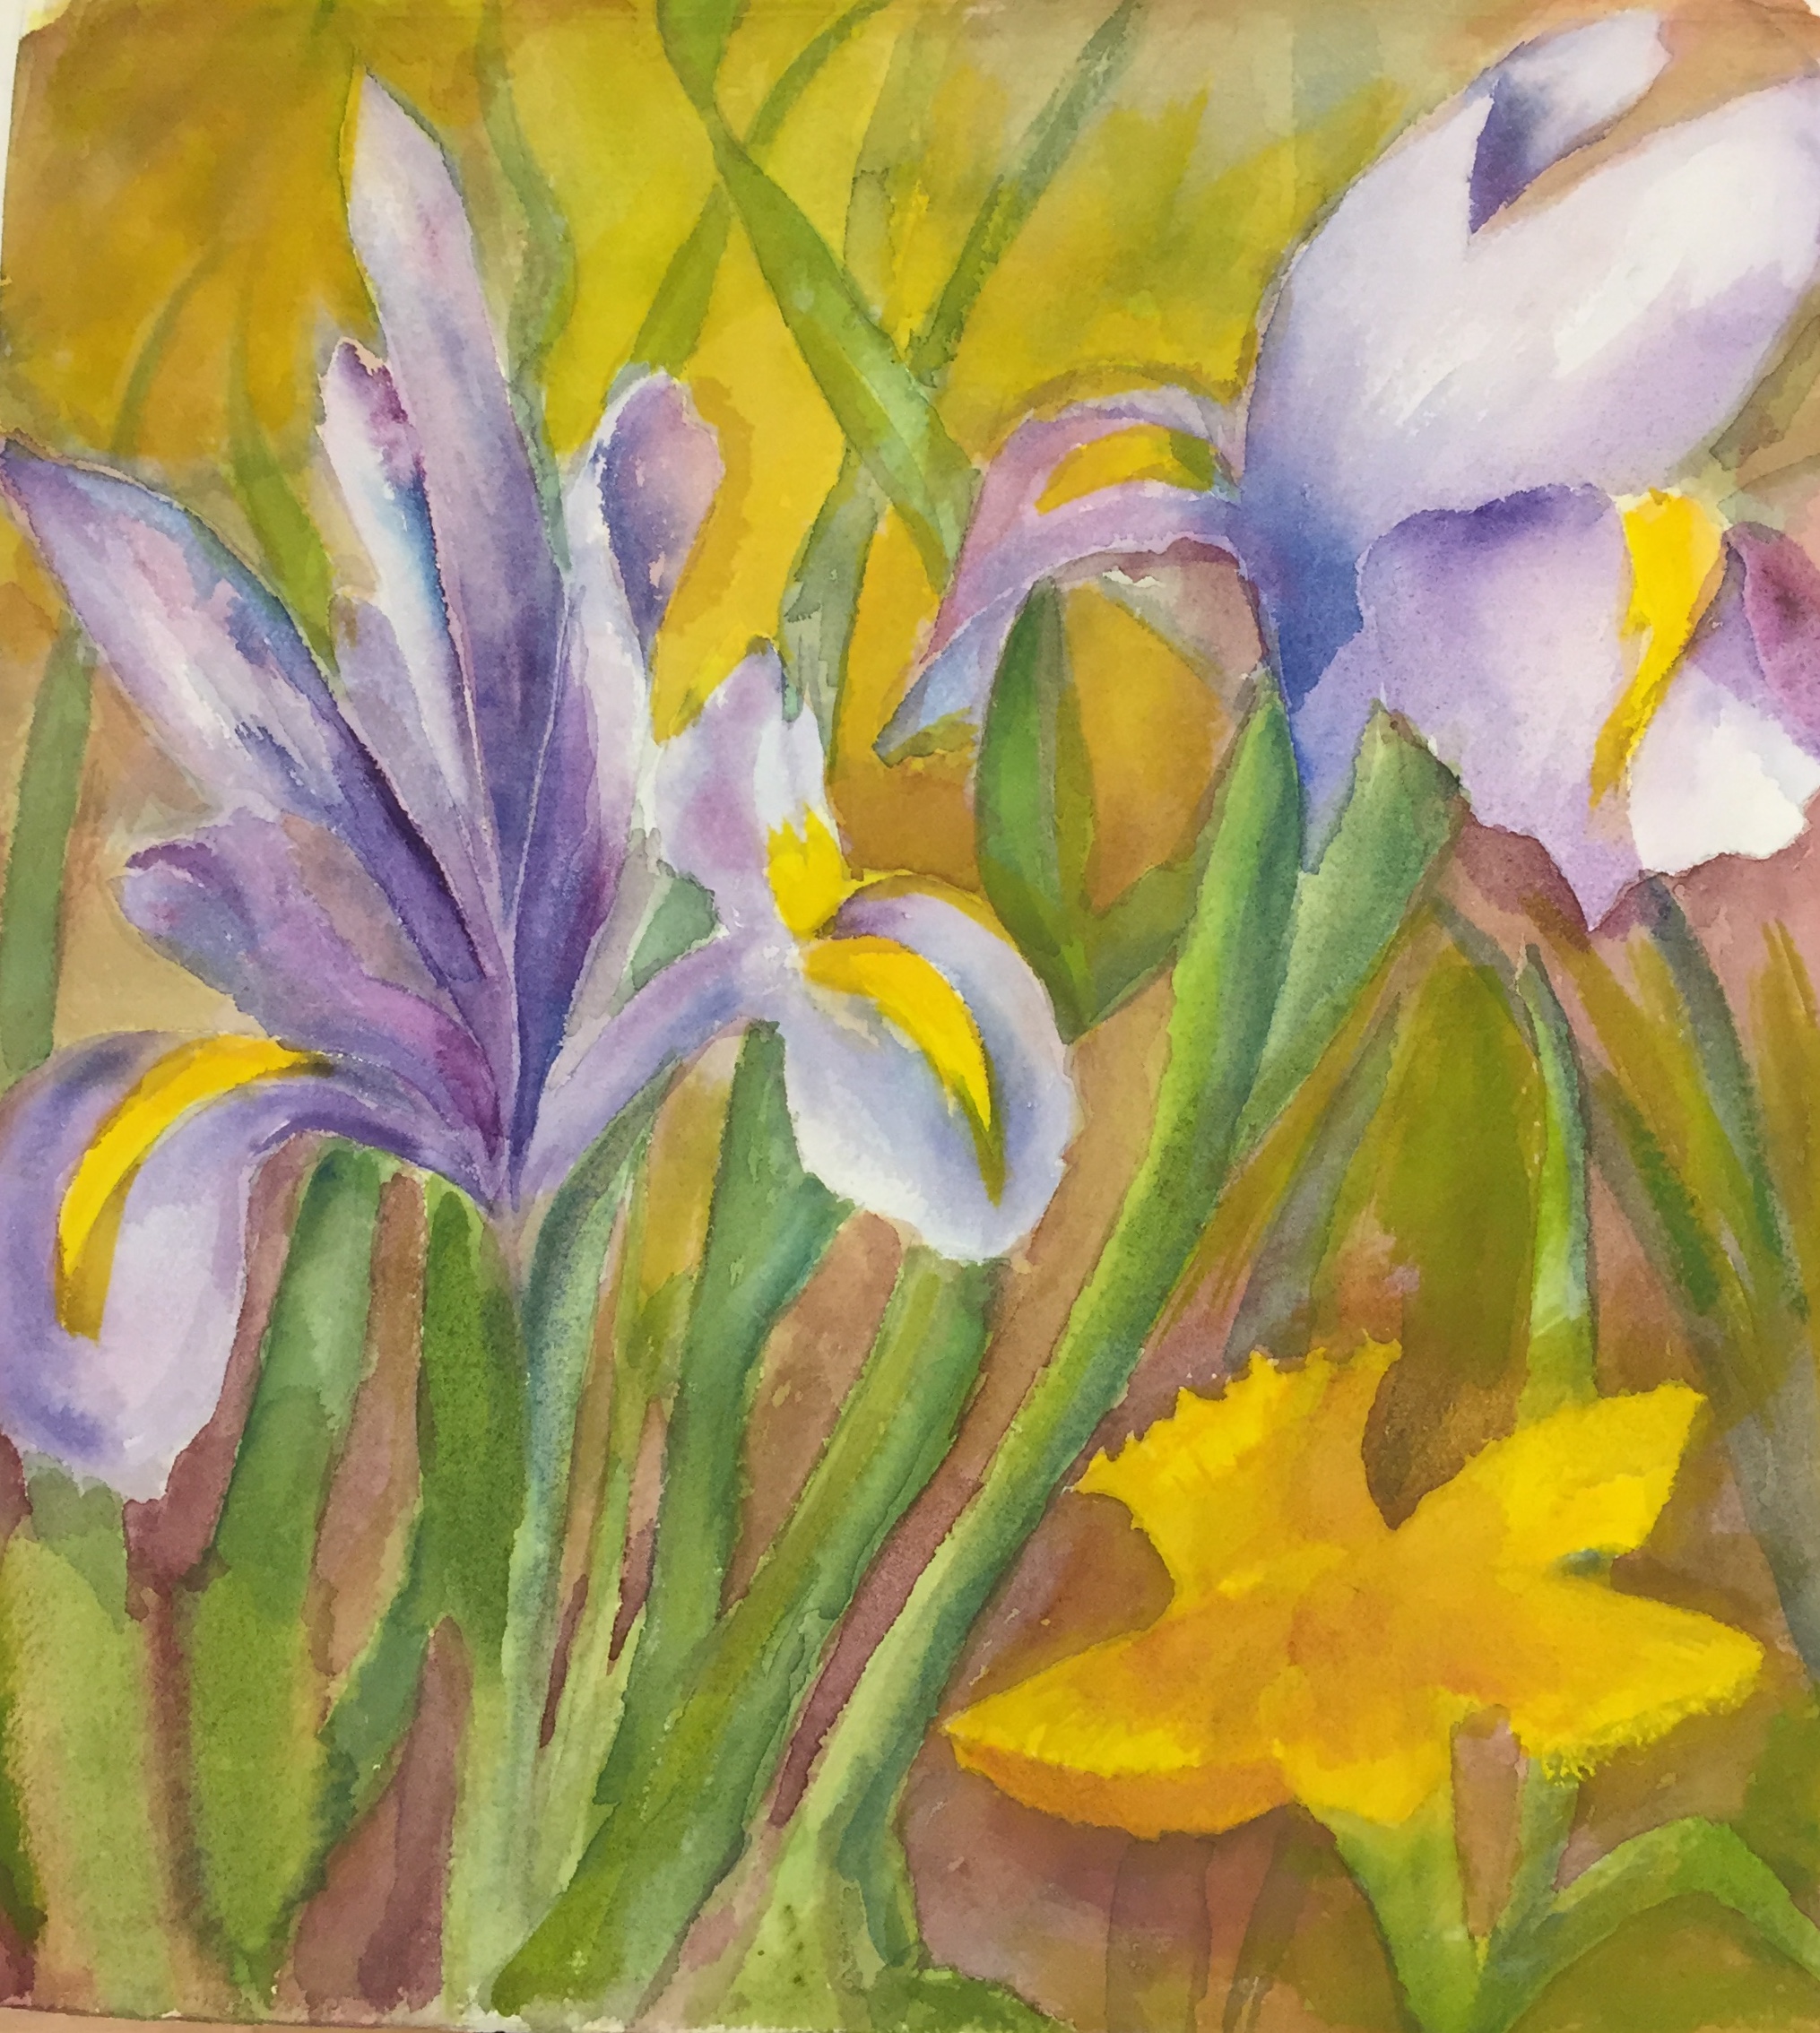 Spring by Peggy Odgers.  Watercolor on paper.